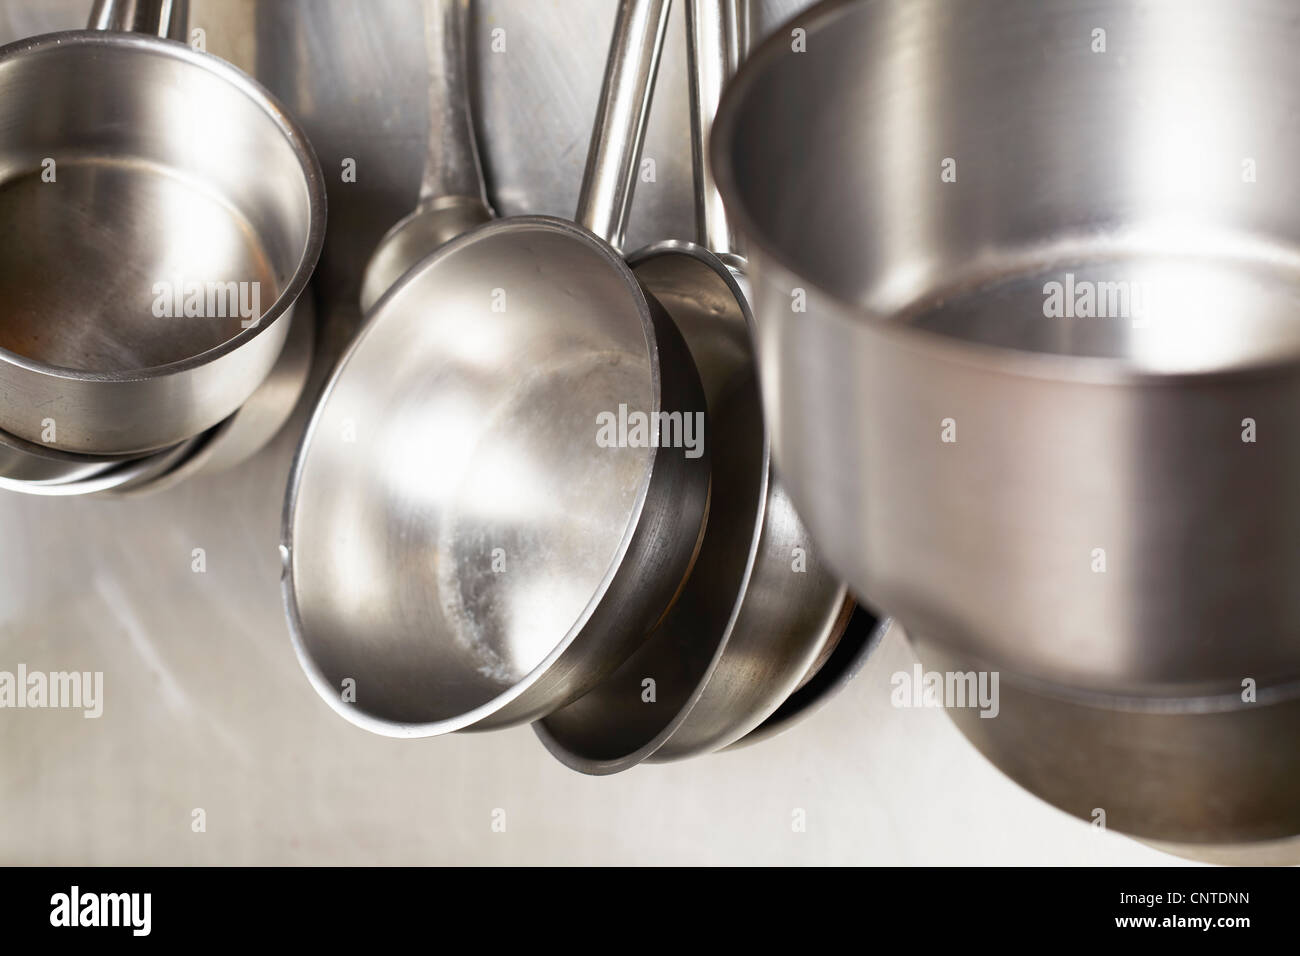 Close up of stainless steel pans Stock Photo